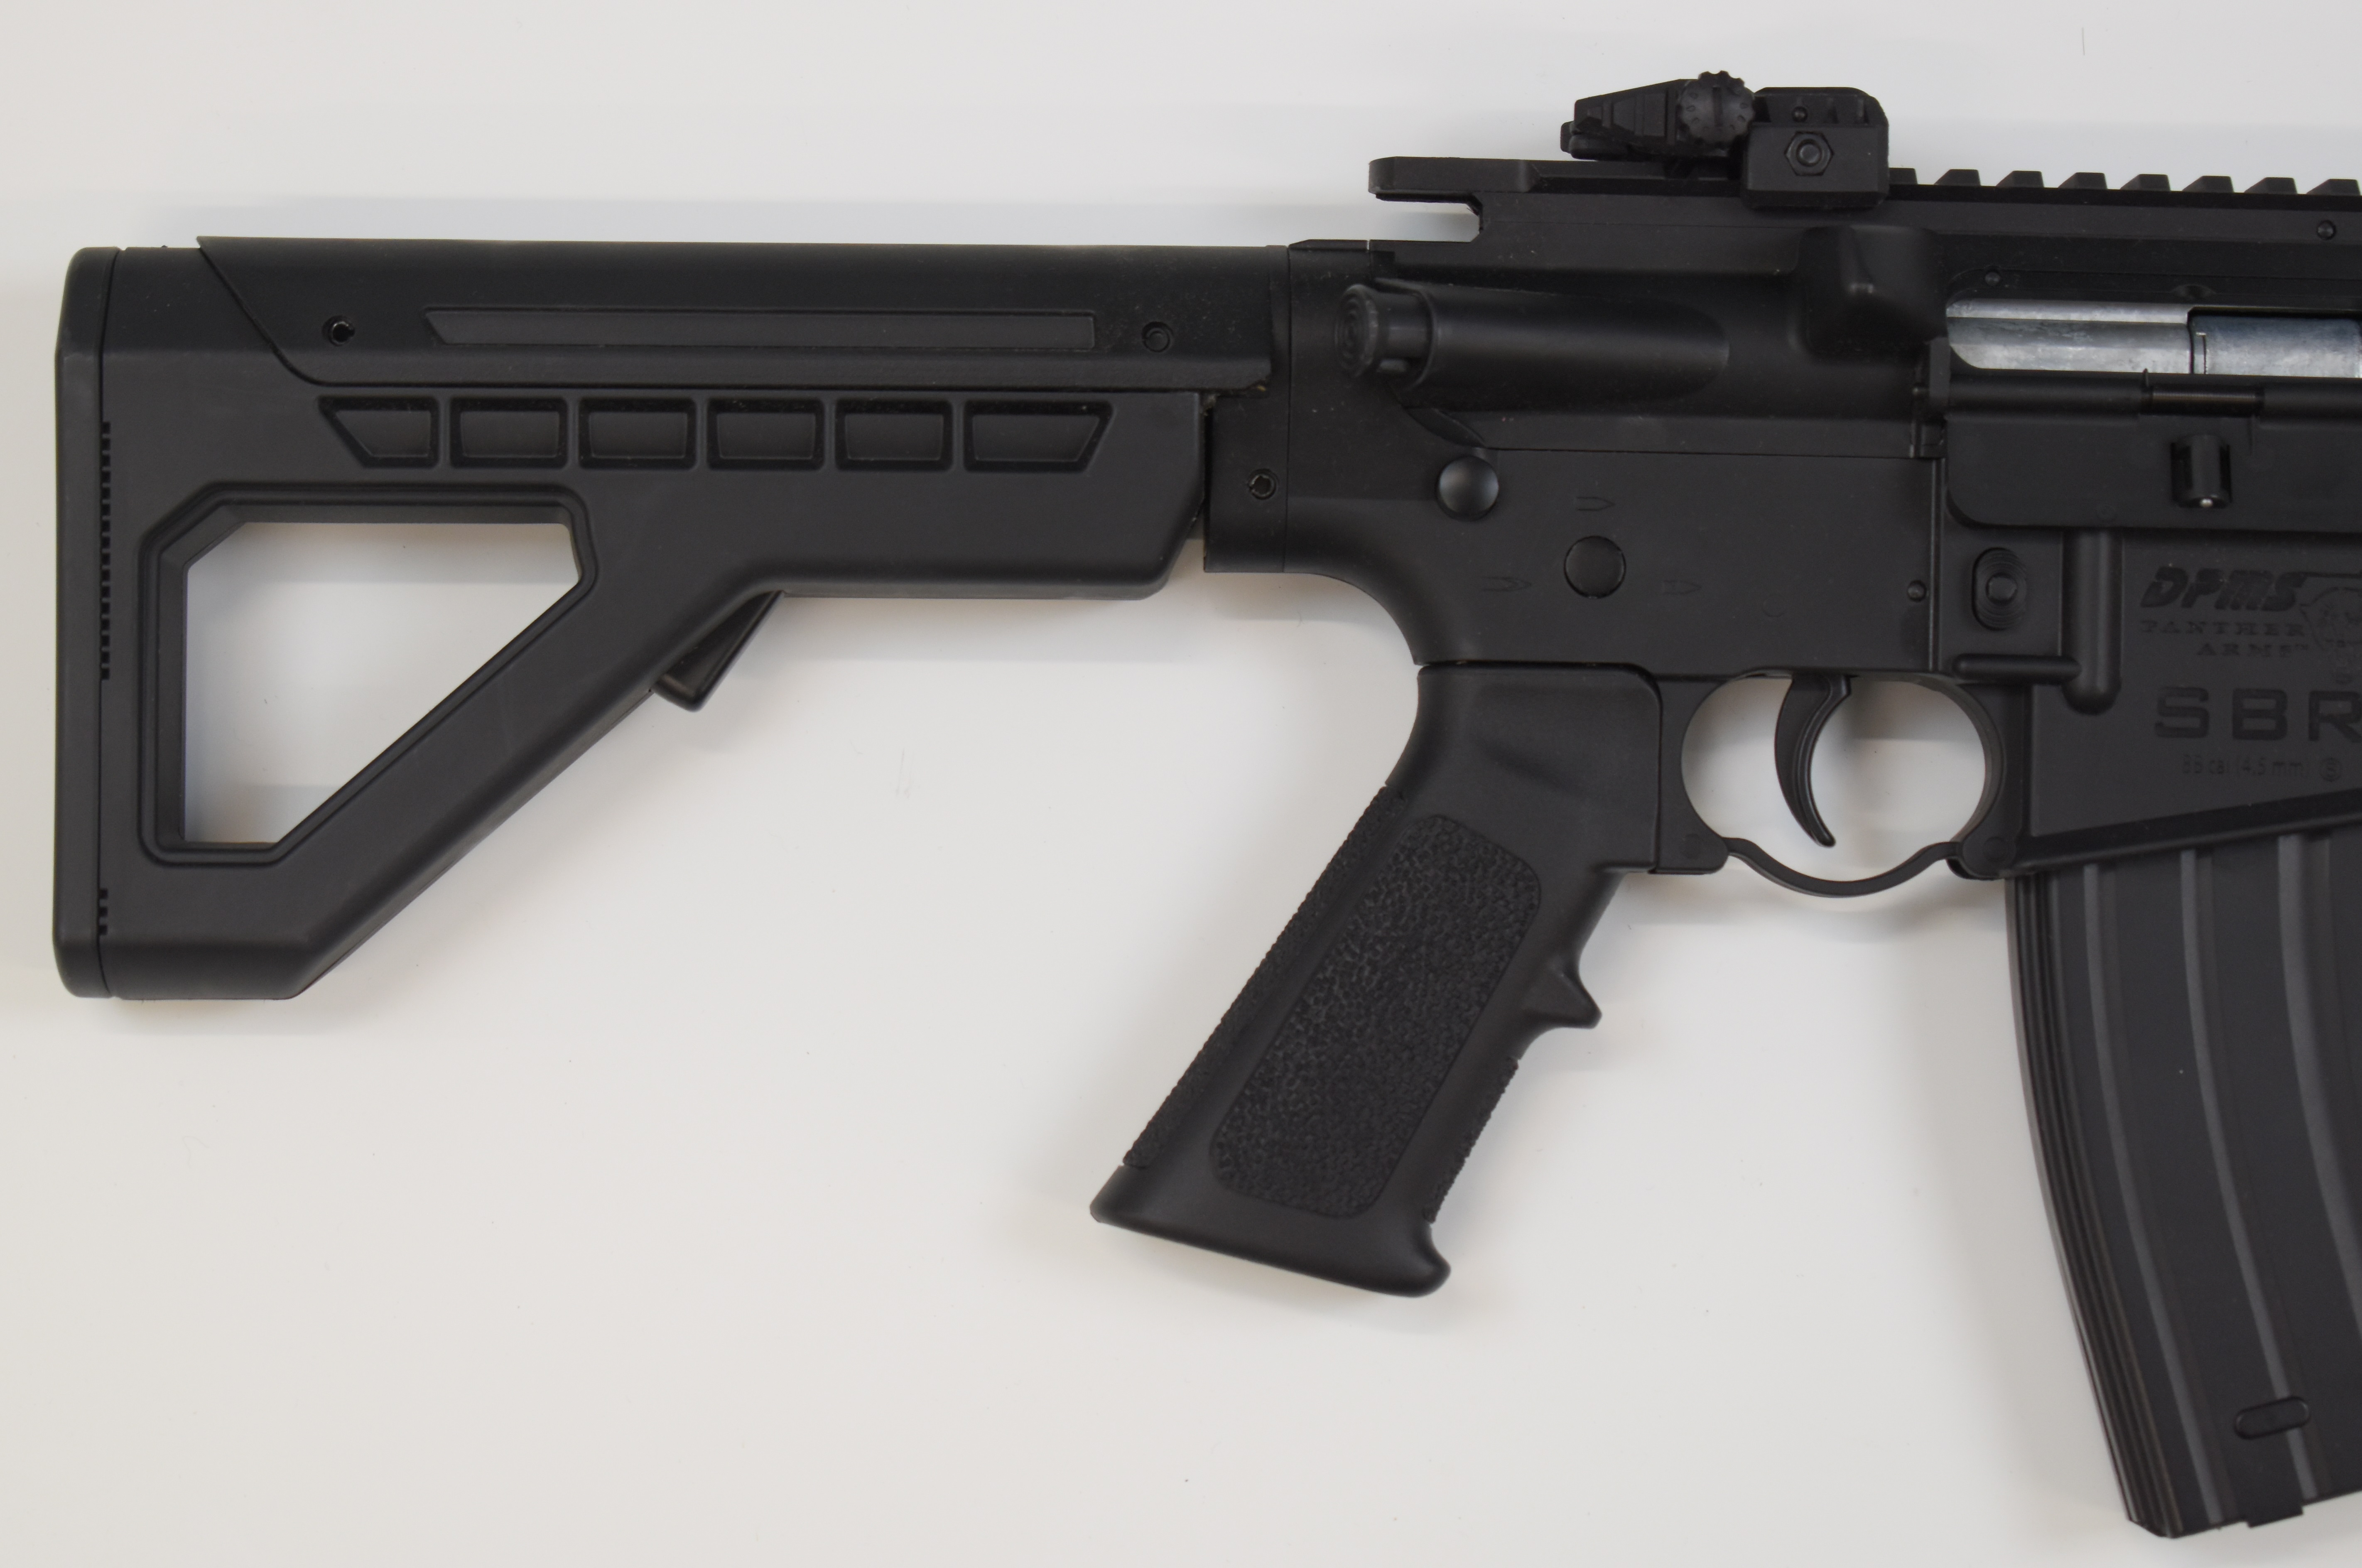 Crosman SBR .177 CO2 assault style air rifle with textured pistol grip, tactical stock, multi-shot - Image 3 of 9